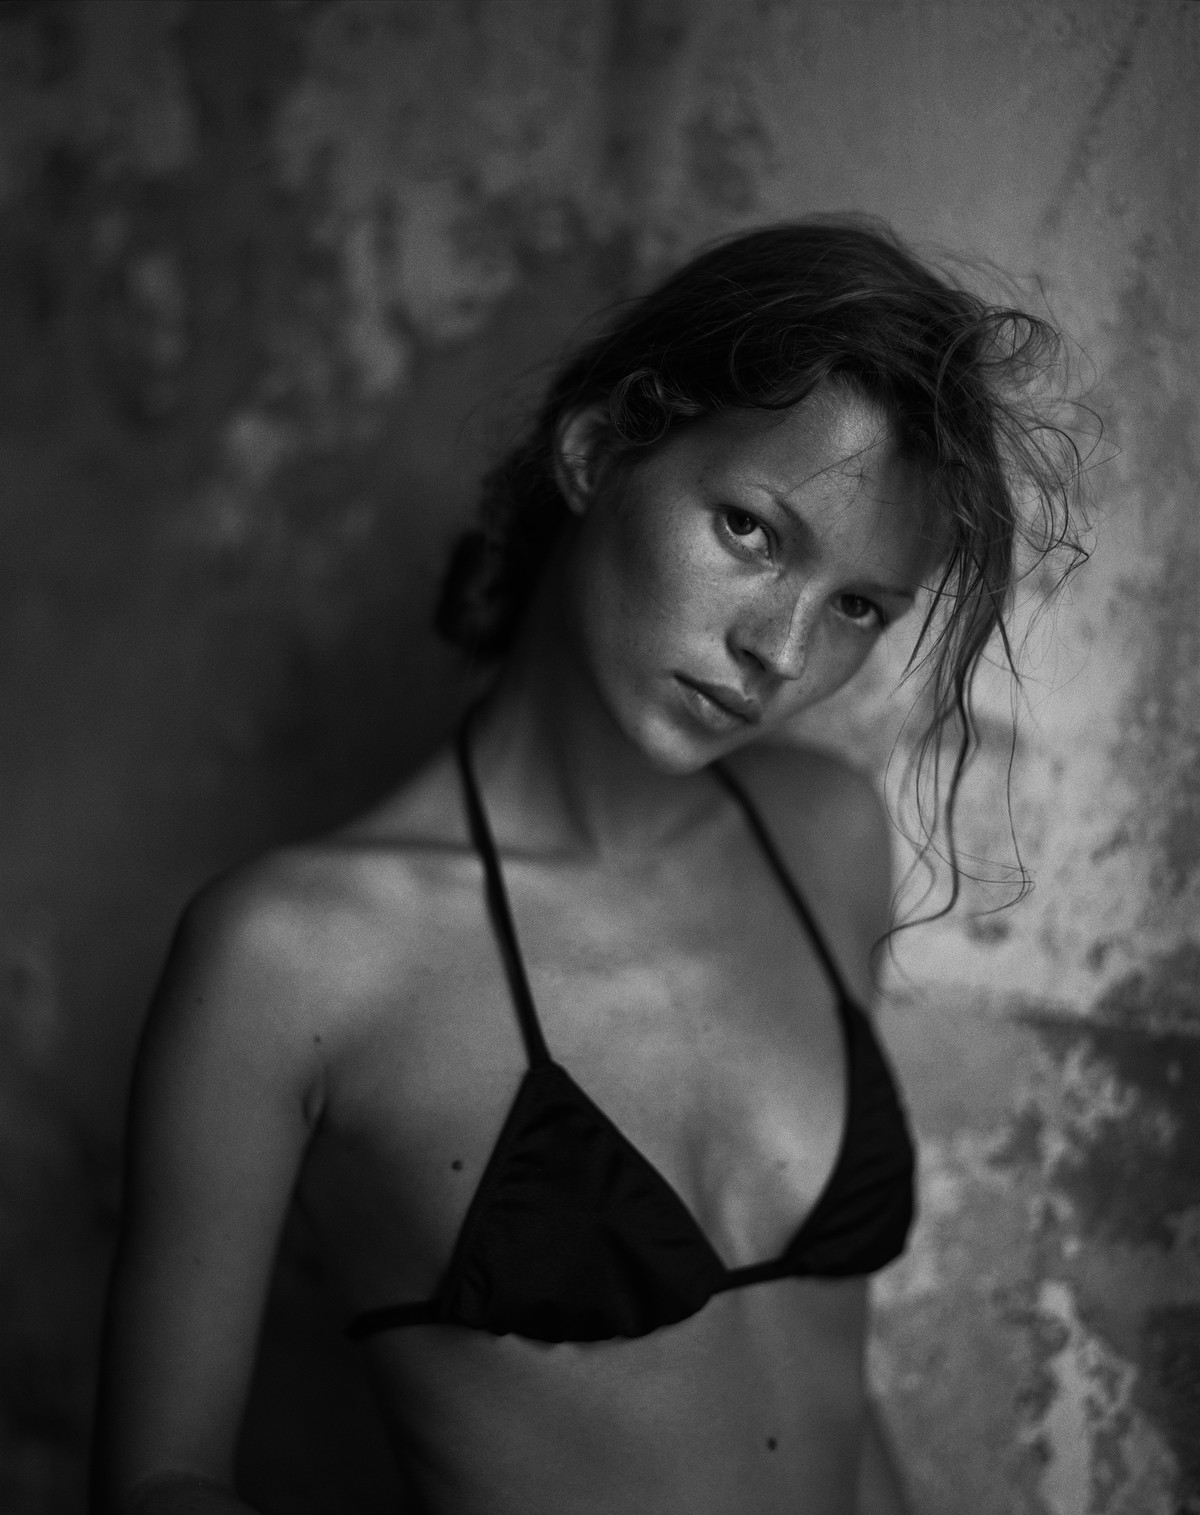 Mario Sorrenti shares unseen Kate Moss photos from the 90s